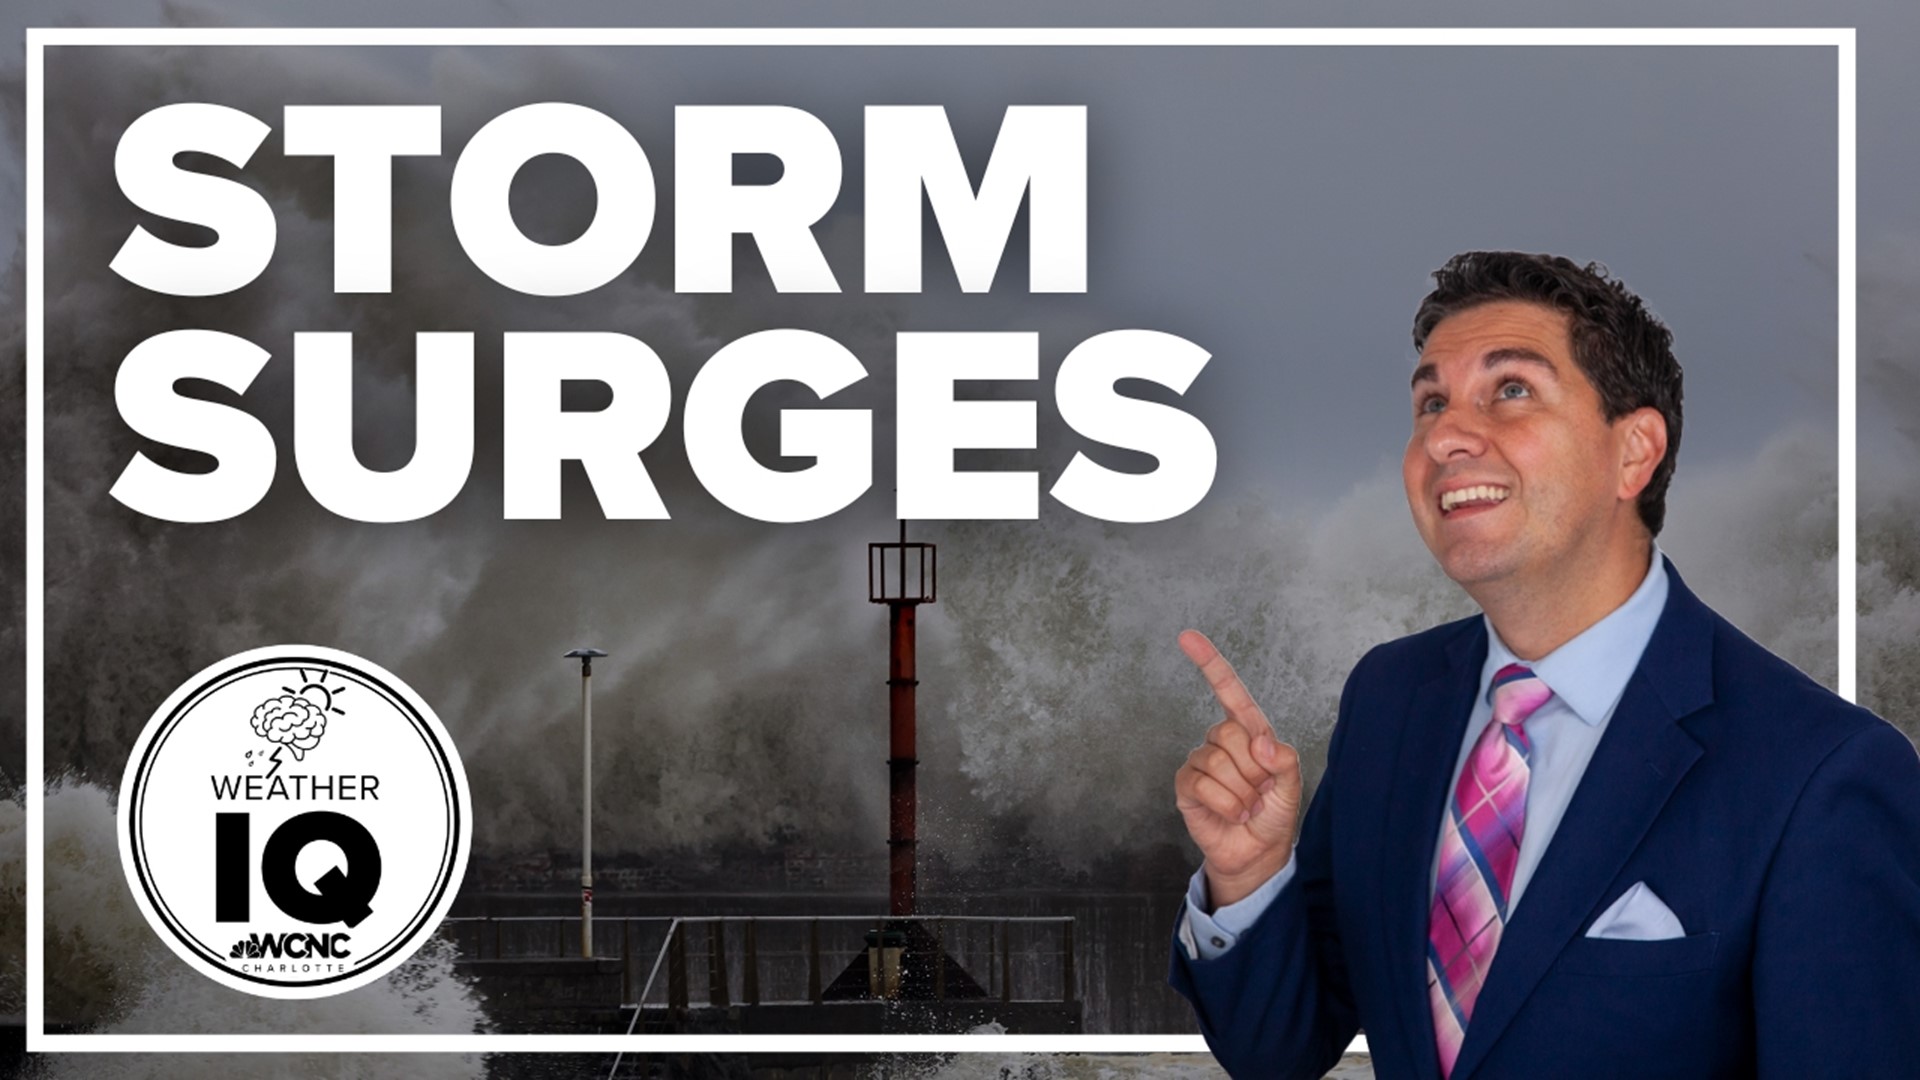 In any hurricane, storm surge is the most devastating to life and property. Here is what you should know about one of hurricanes most lethal weapons.